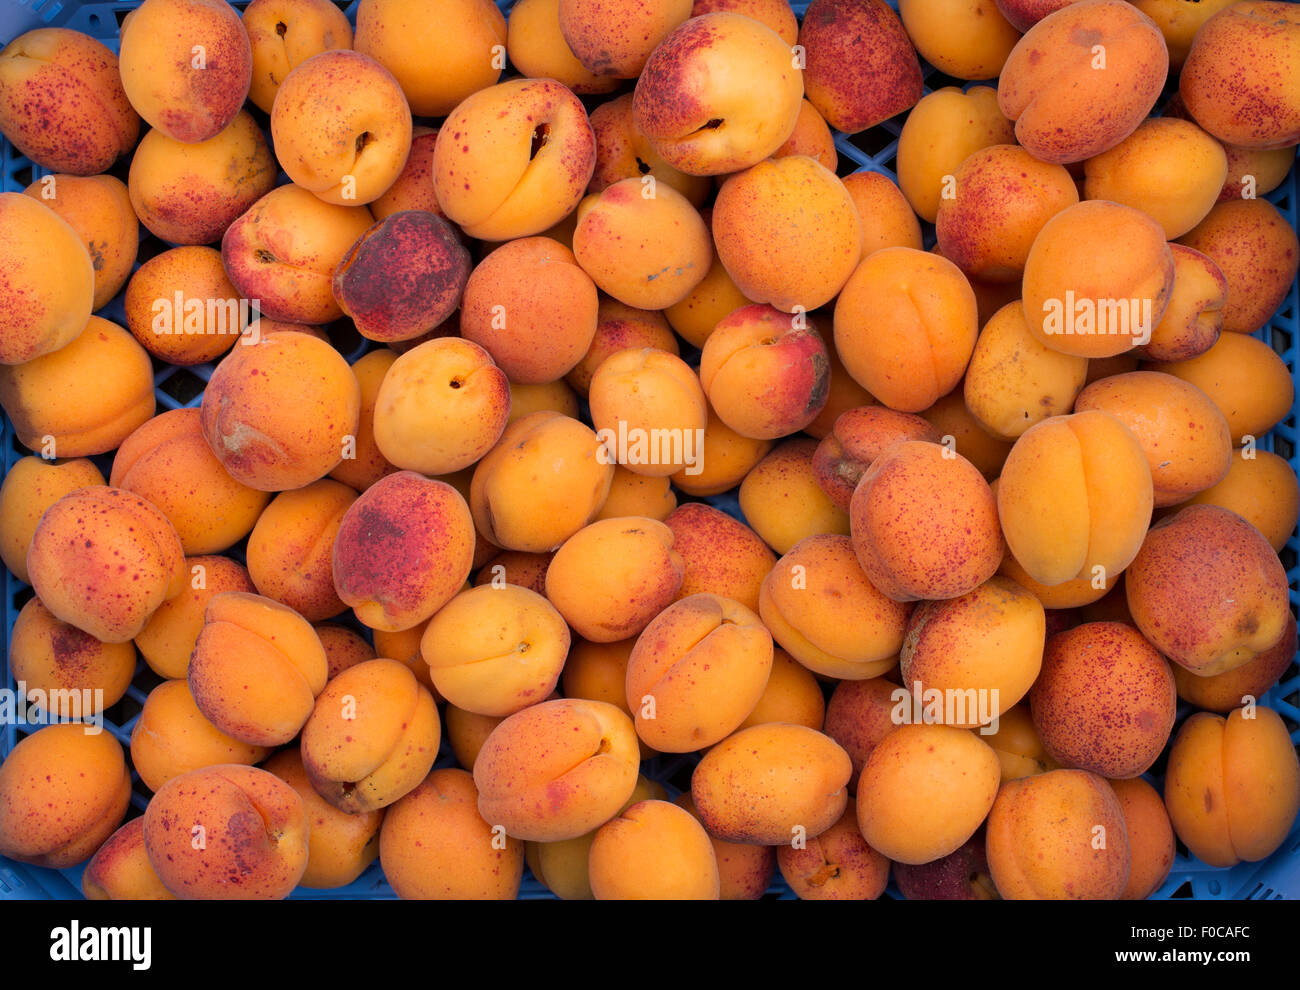 Prunus armeniaca 'Moorpark'. Harvested Apricots 'Moorpark' in a container Stock Photo